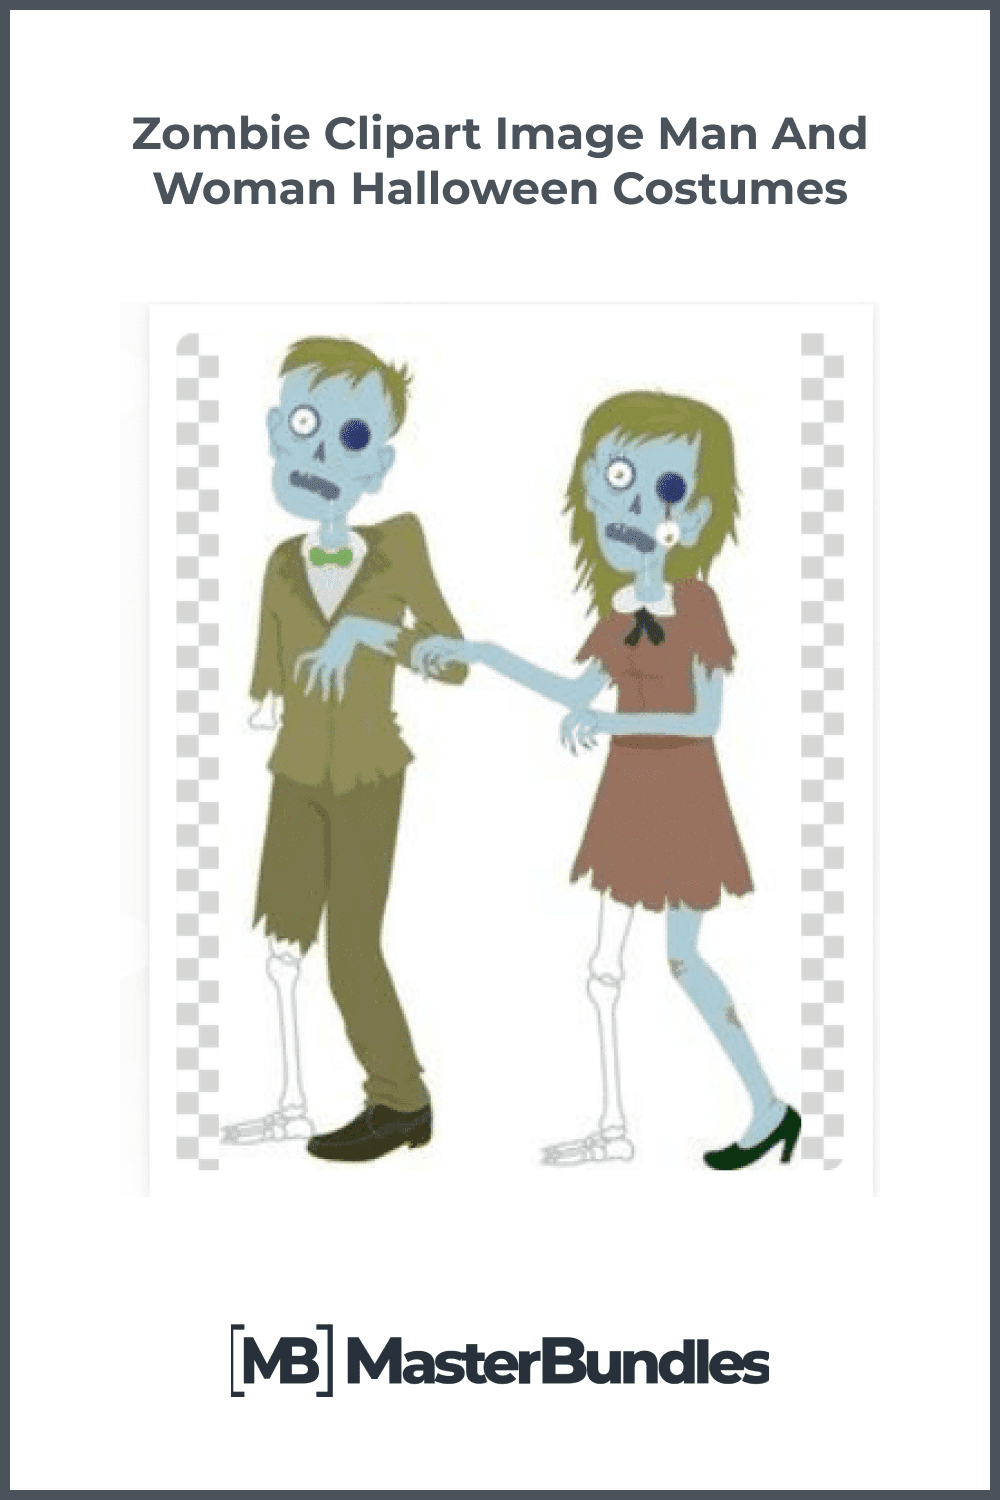 Classic zombies for terrifying illustrations.